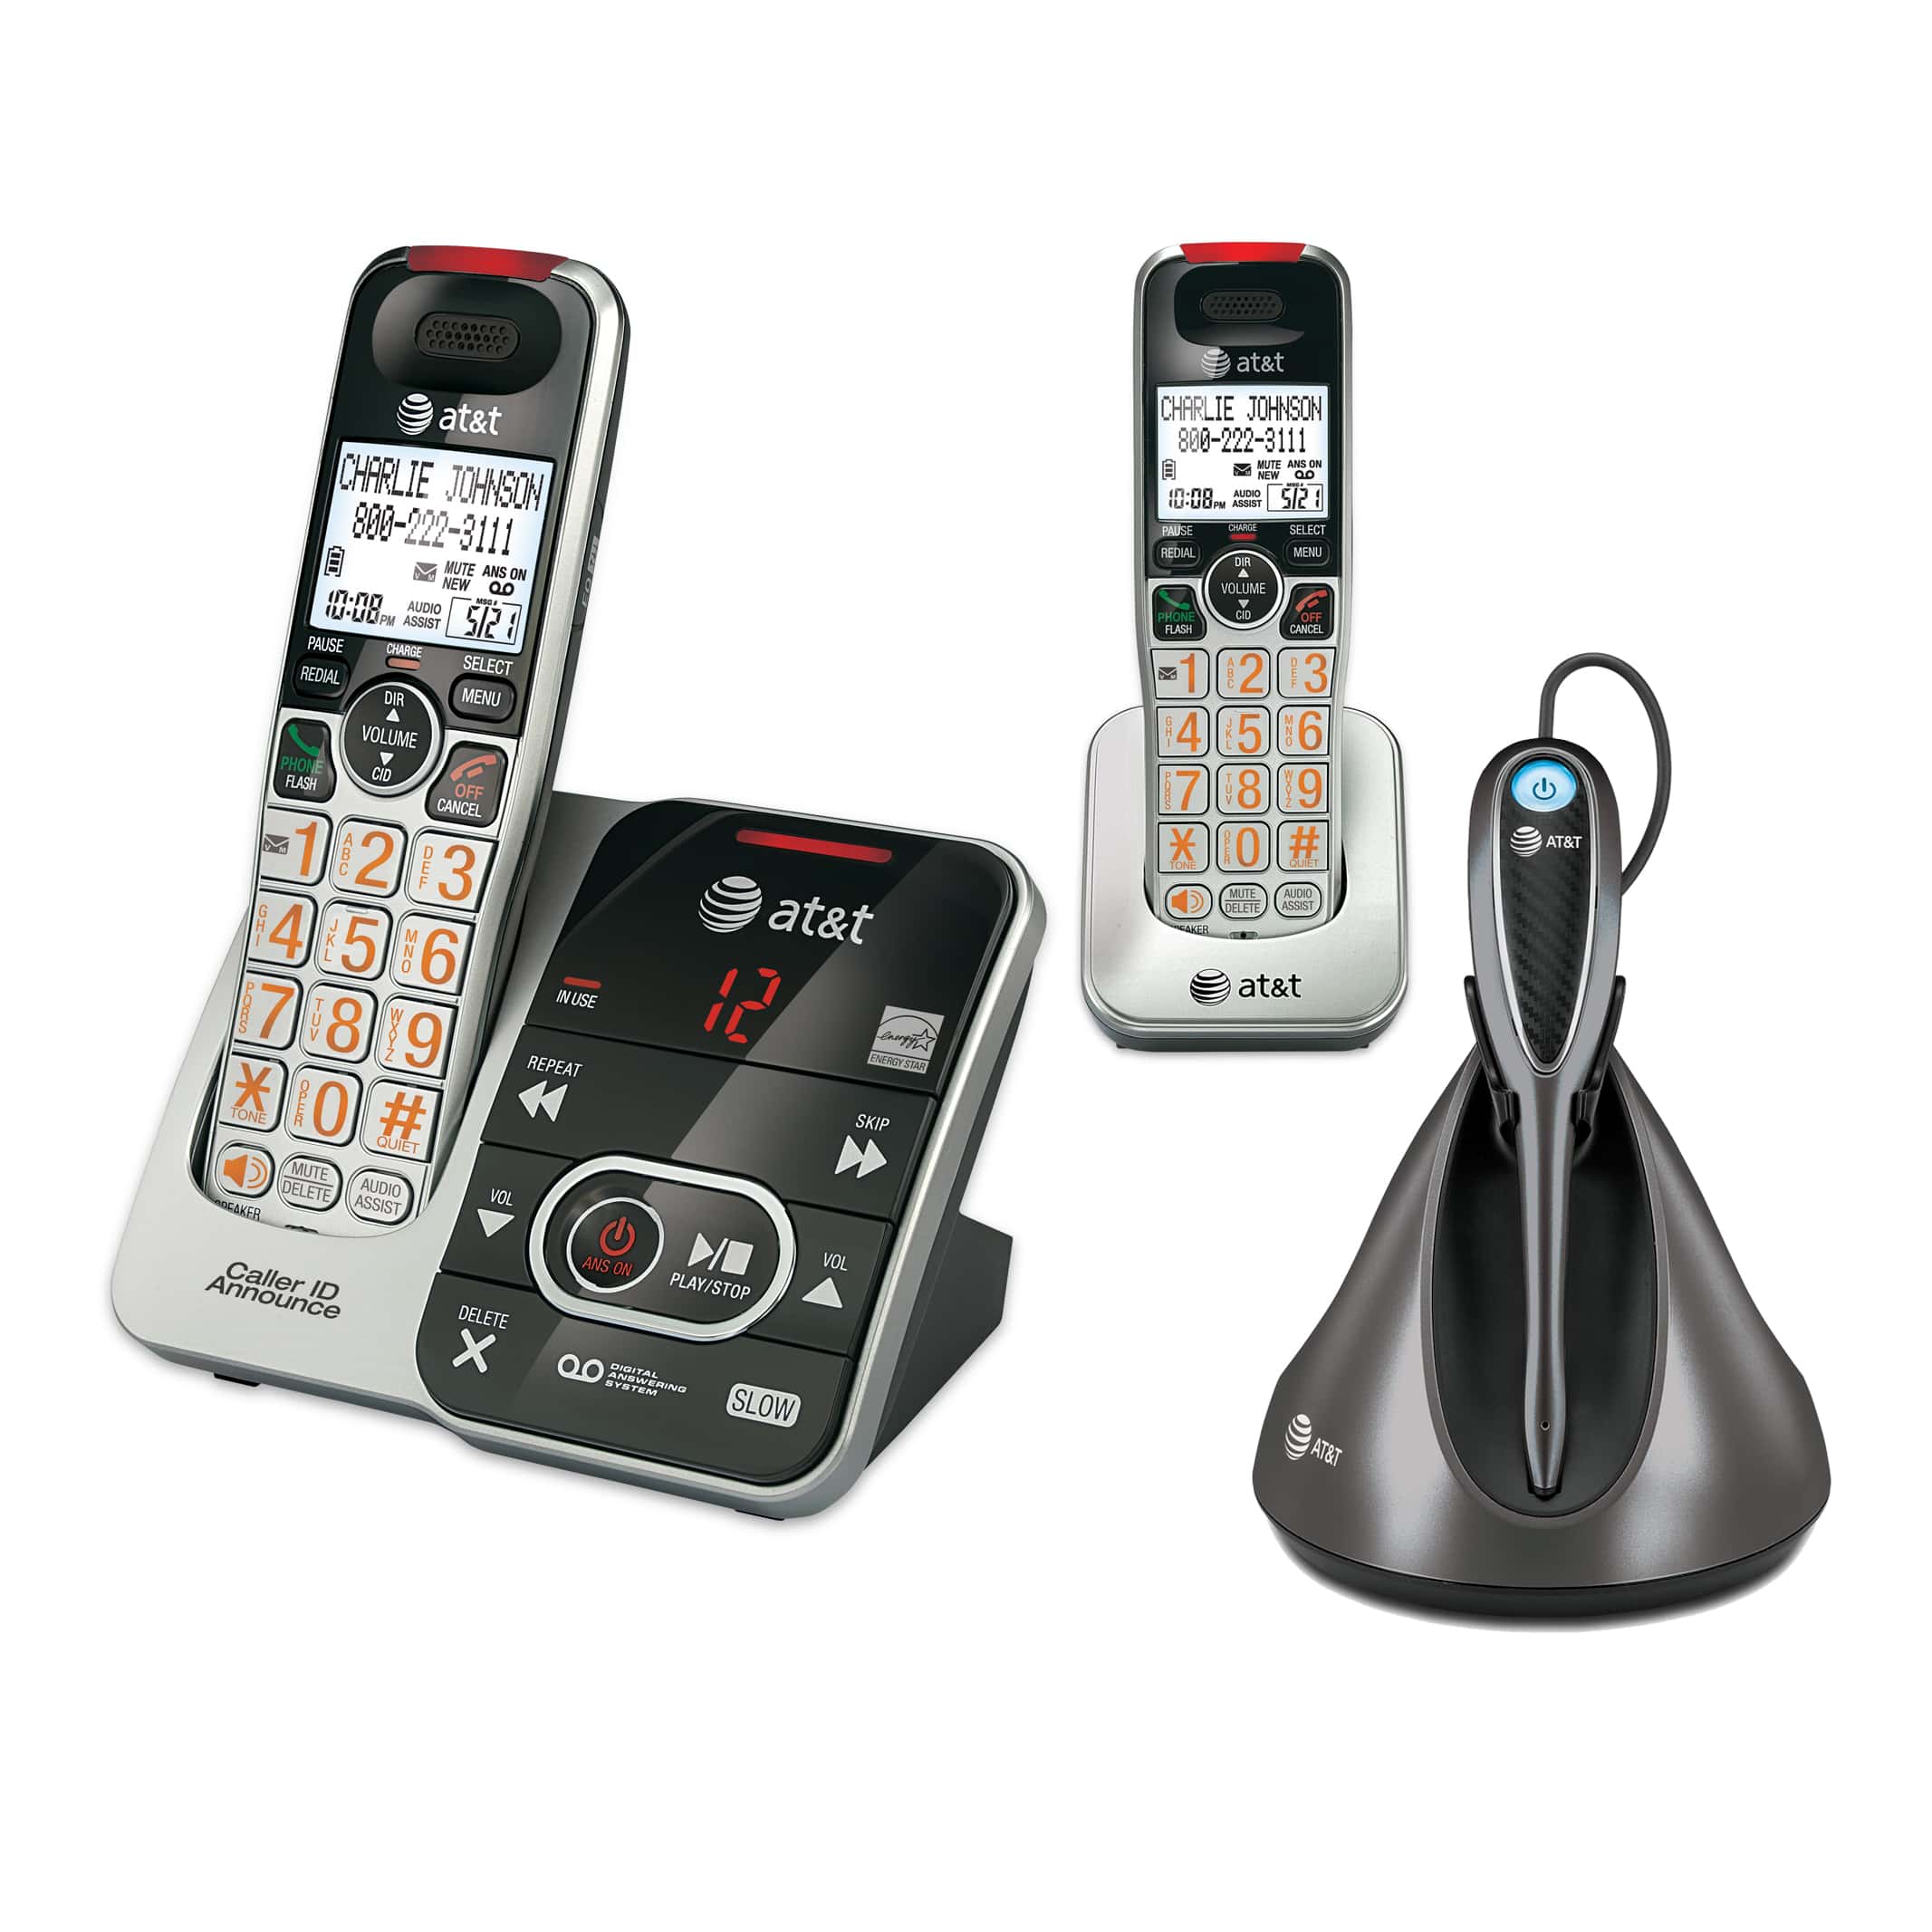 2 handset phone system with cordless headset - view 1